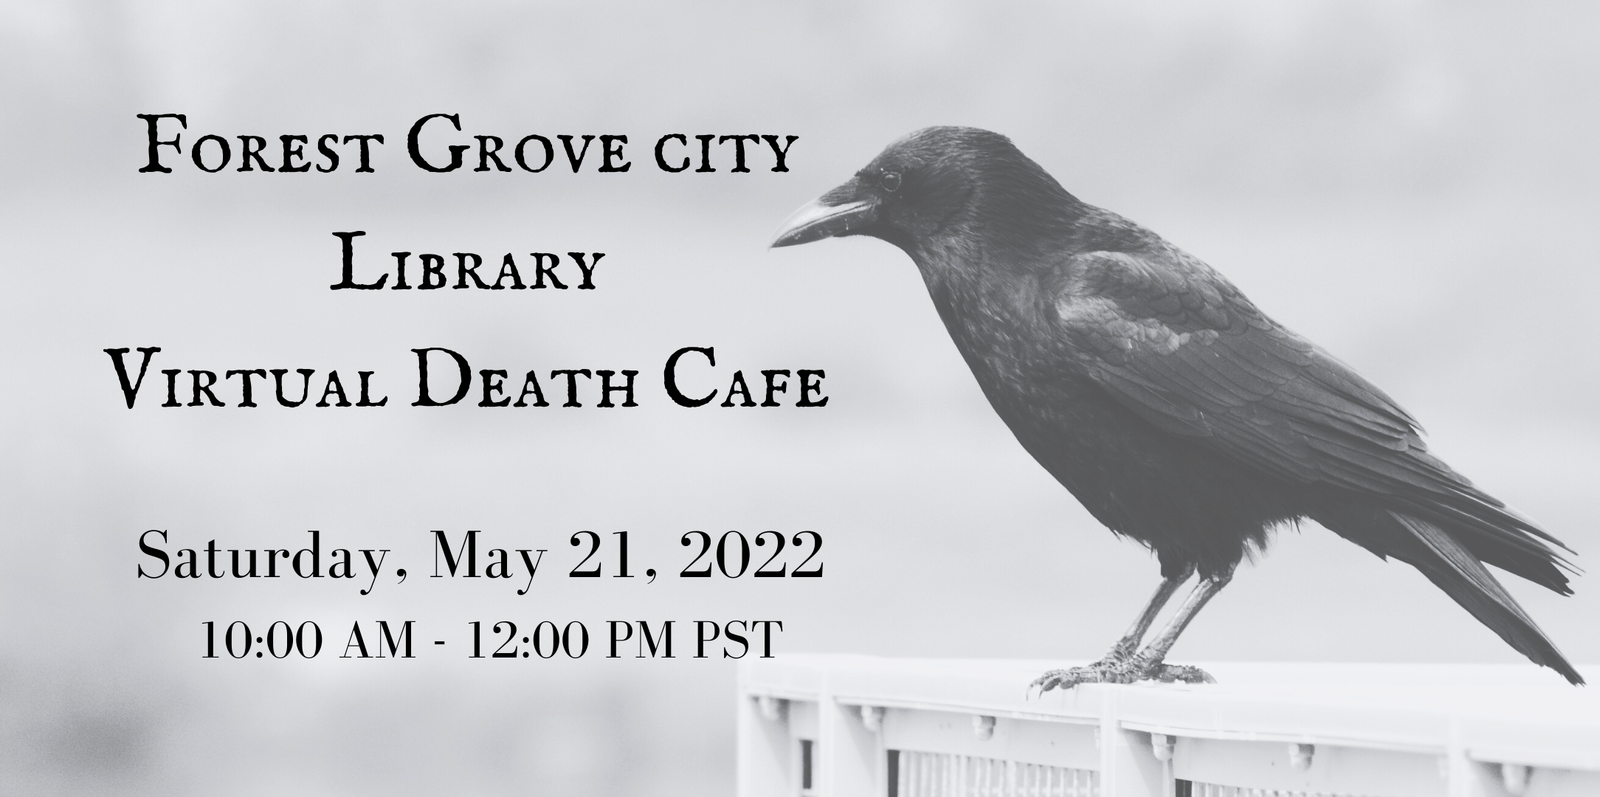 Virtual Death Cafe PDT Forest Grove City Library